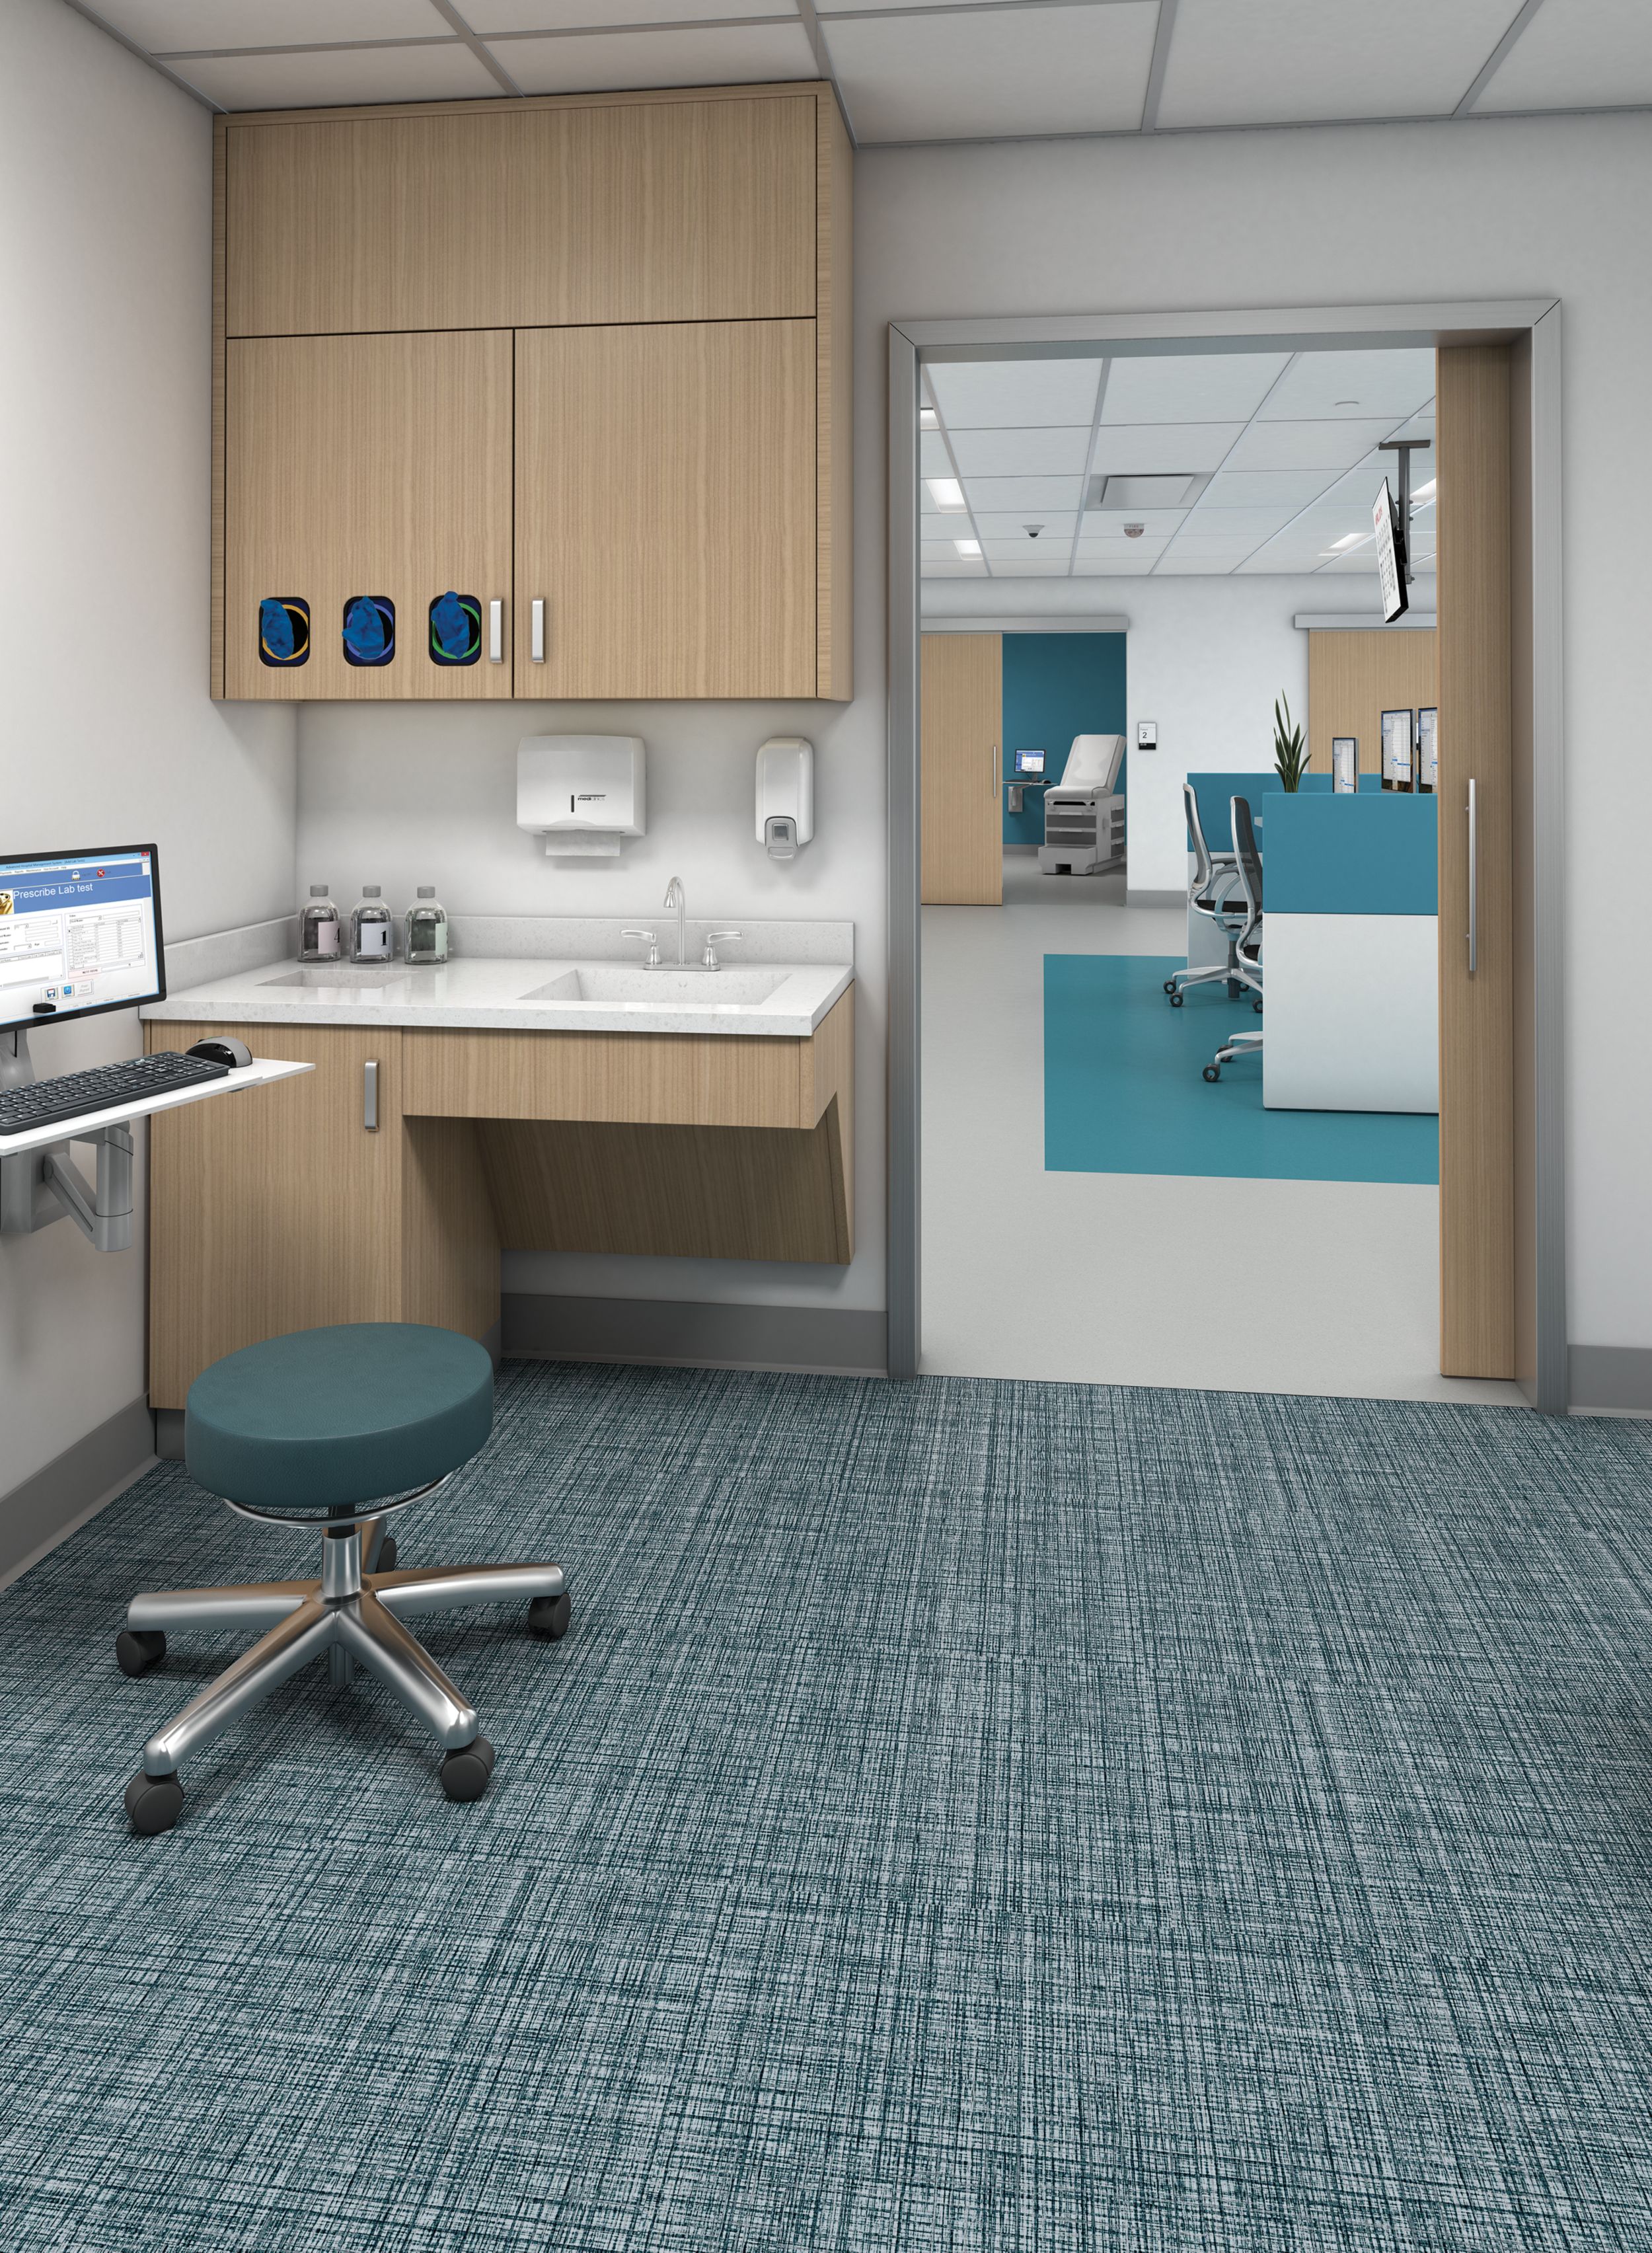 Interface Native Fabric LVT in exam room with nora by Interface sentica rubber flooring in outer area Bildnummer 15